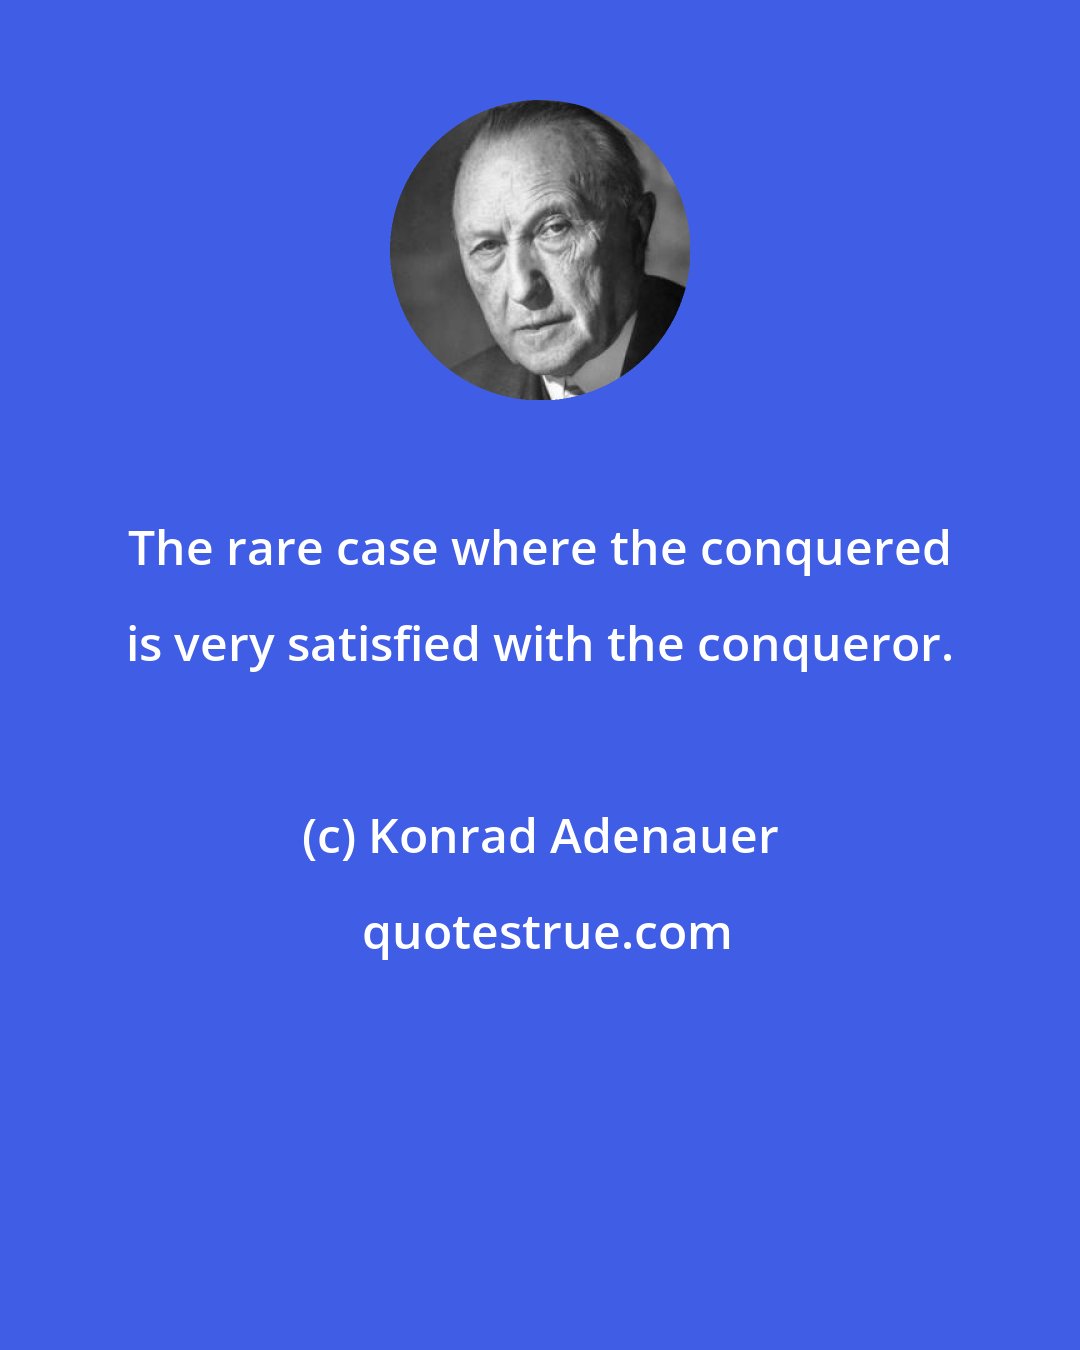 Konrad Adenauer: The rare case where the conquered is very satisfied with the conqueror.